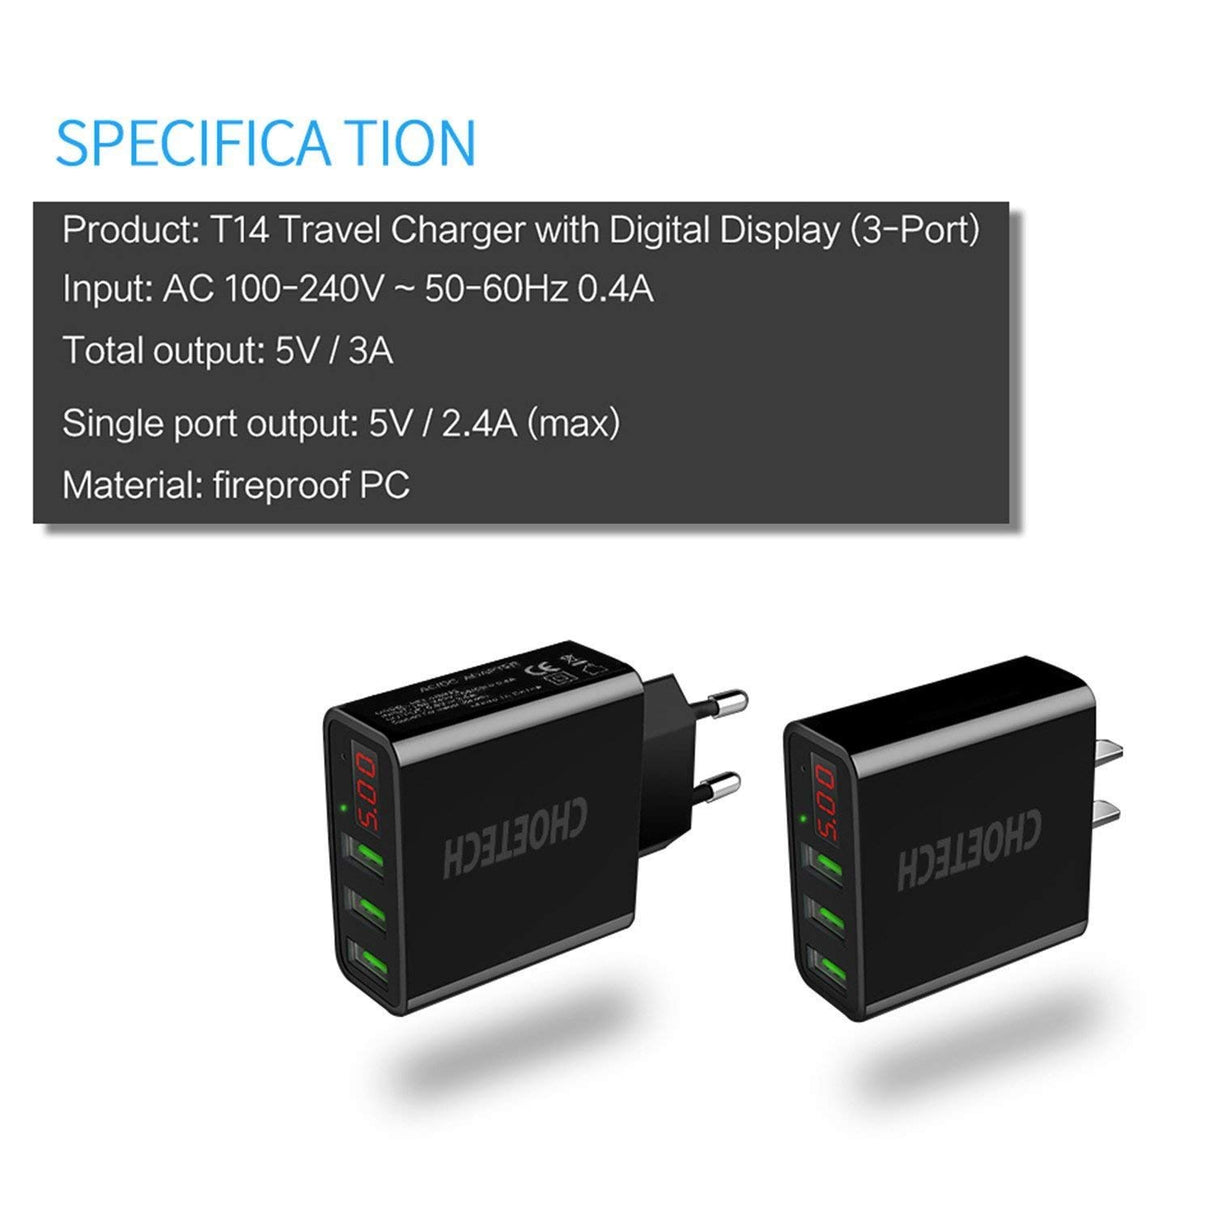 C0026 Rapid Wall Charger LED Display 5V/3A 3-Port Wall Charger CHOETECH